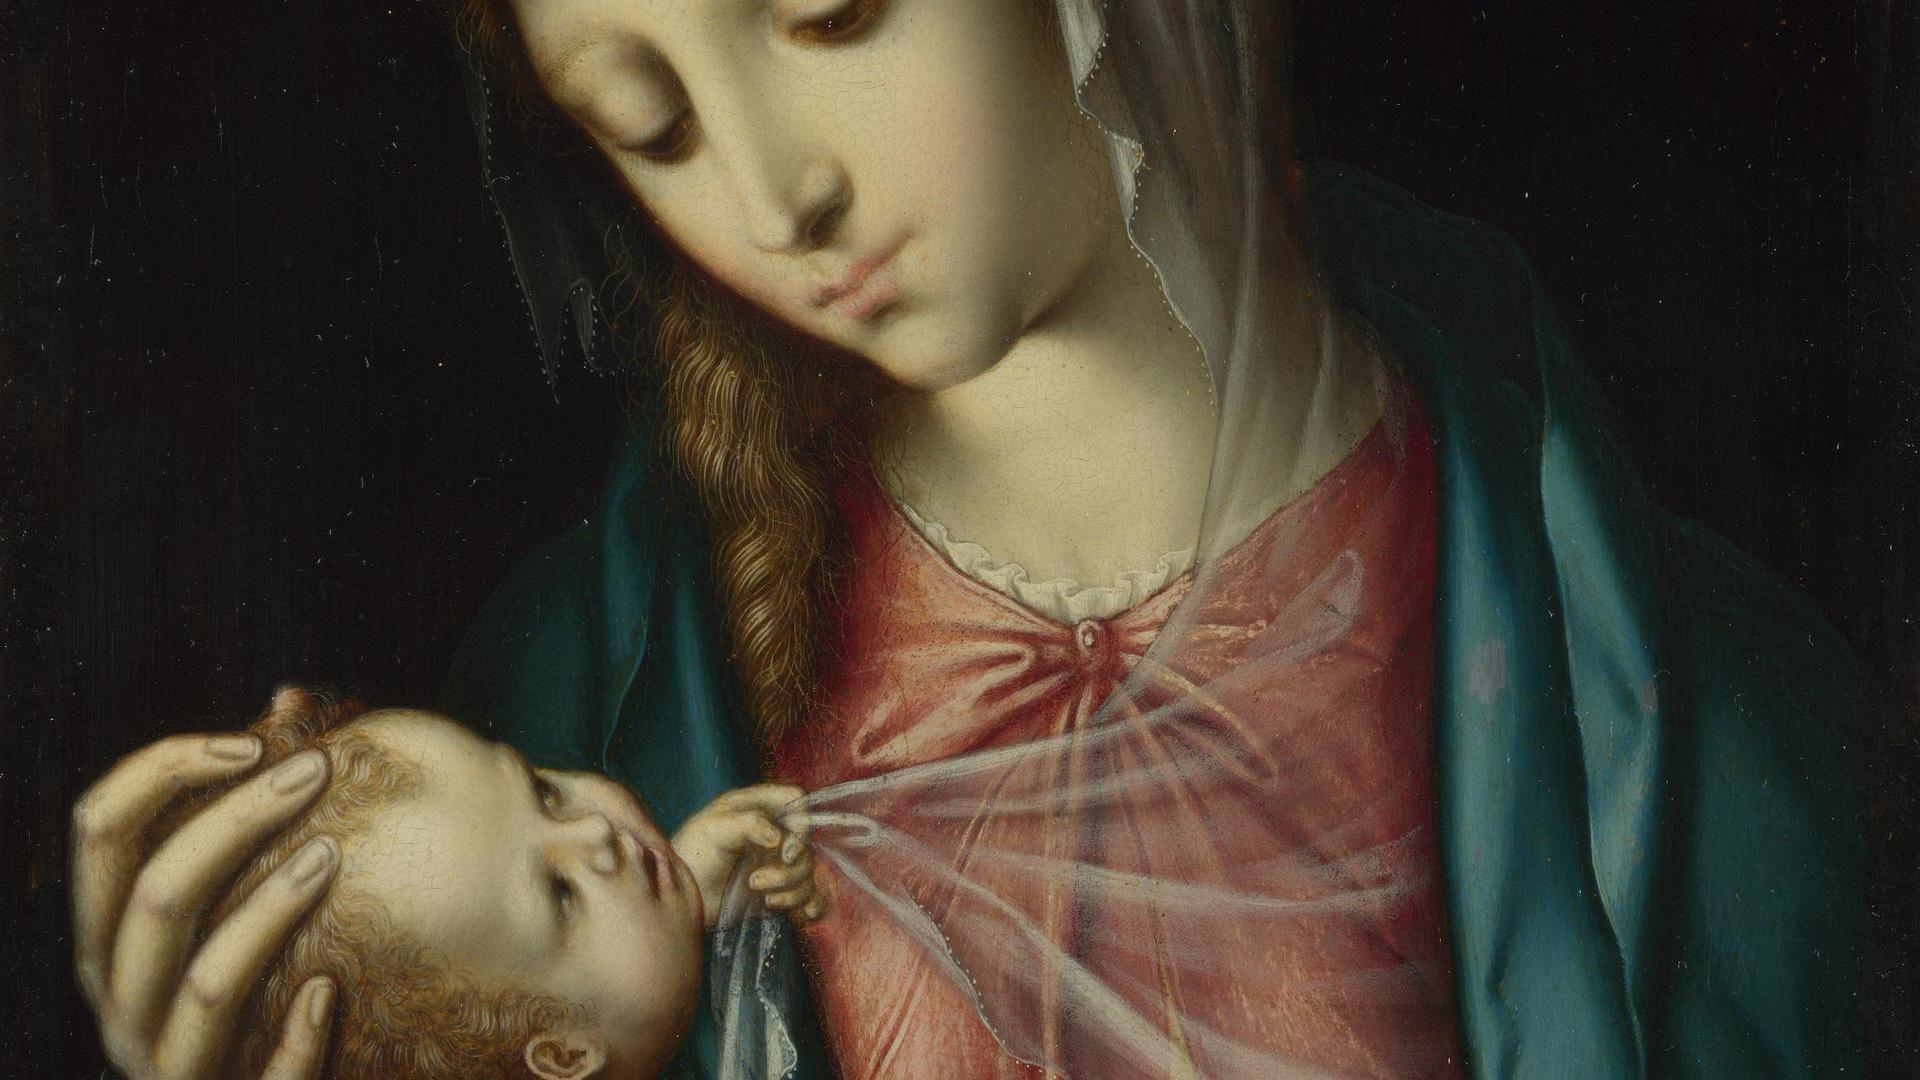 The Virgin and Child by Luis de Morales